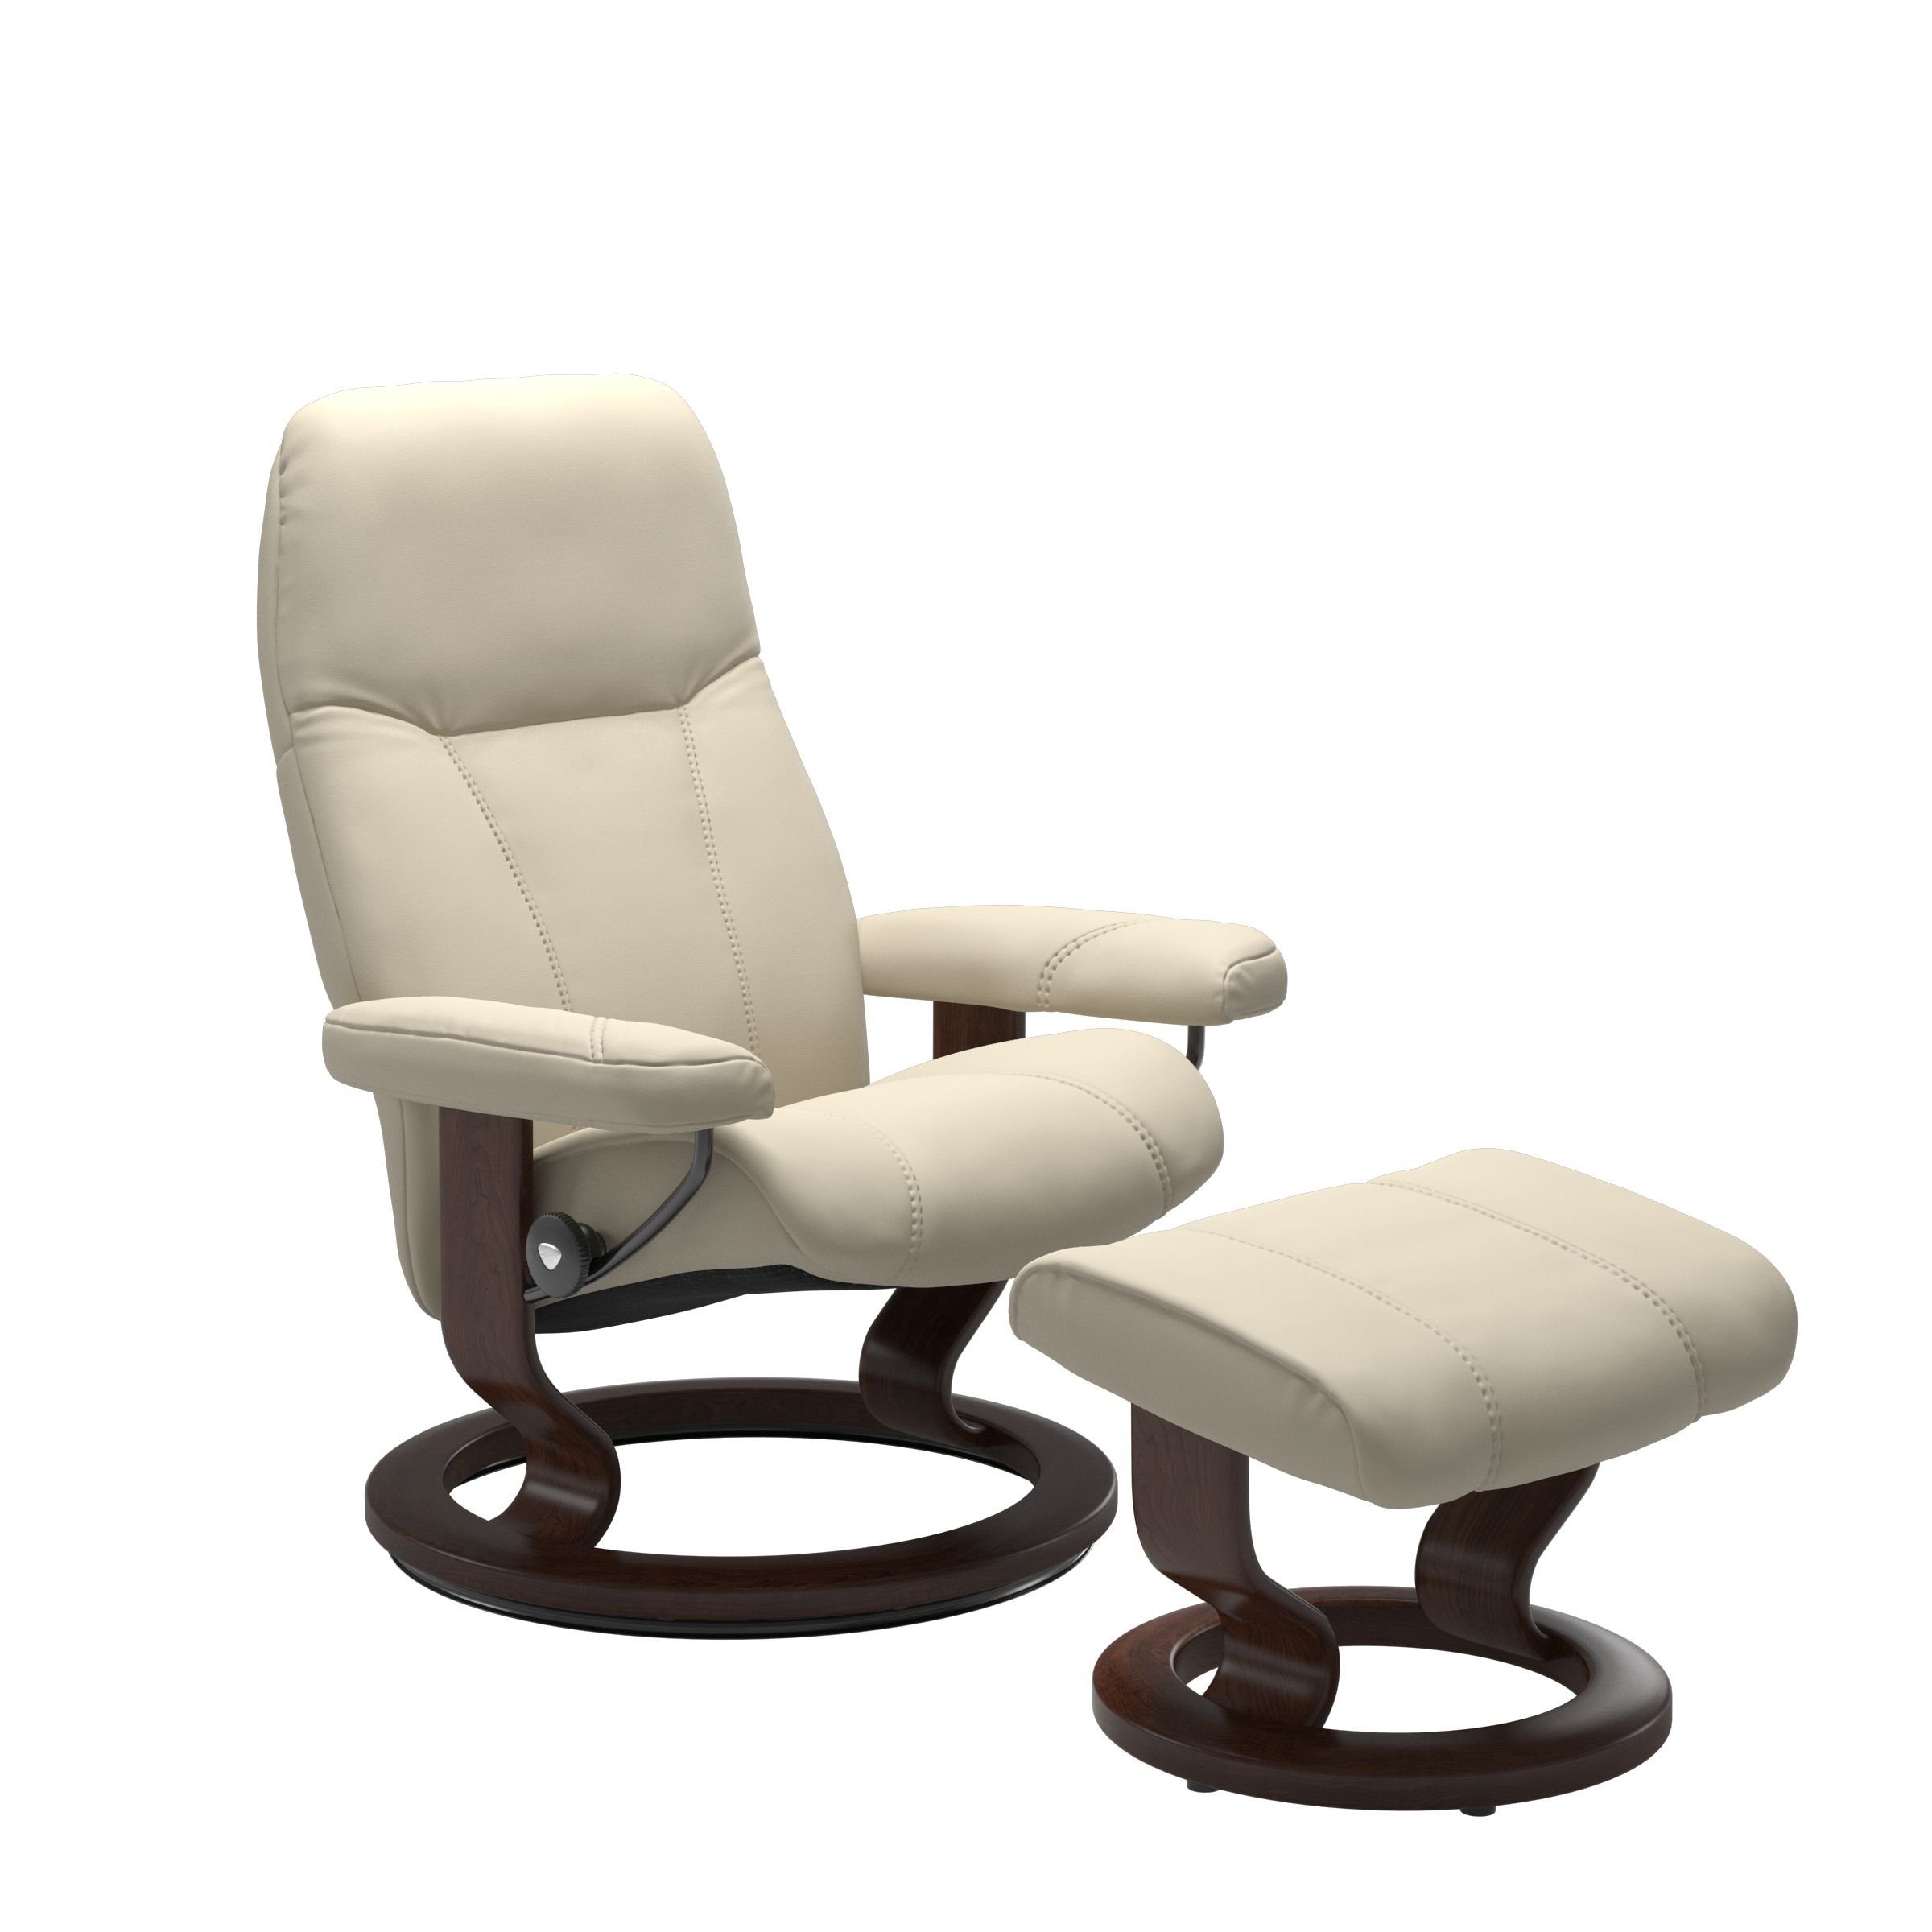 Stressless® Relaxsessel Consul Classic Größe M, Made in Europe